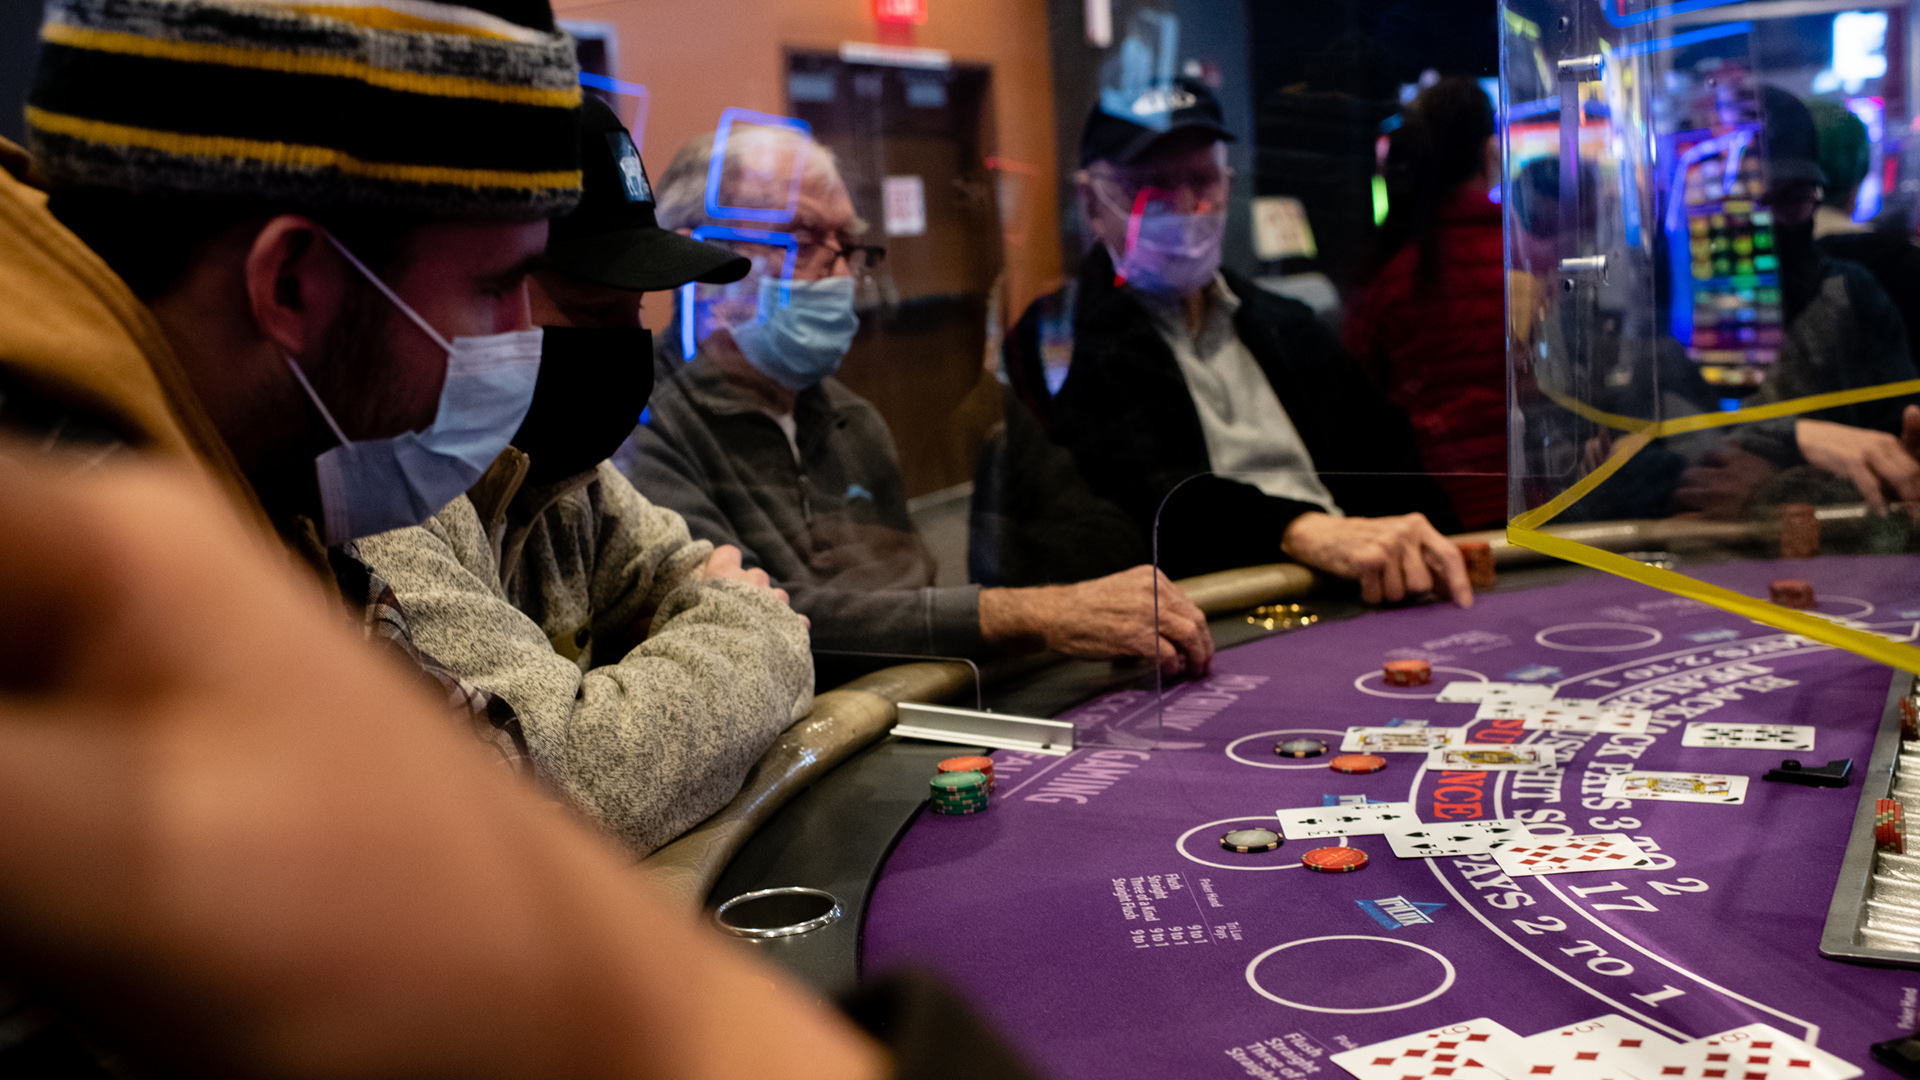 Several people wearing face masks sit at a blackjack table with cards and chips.